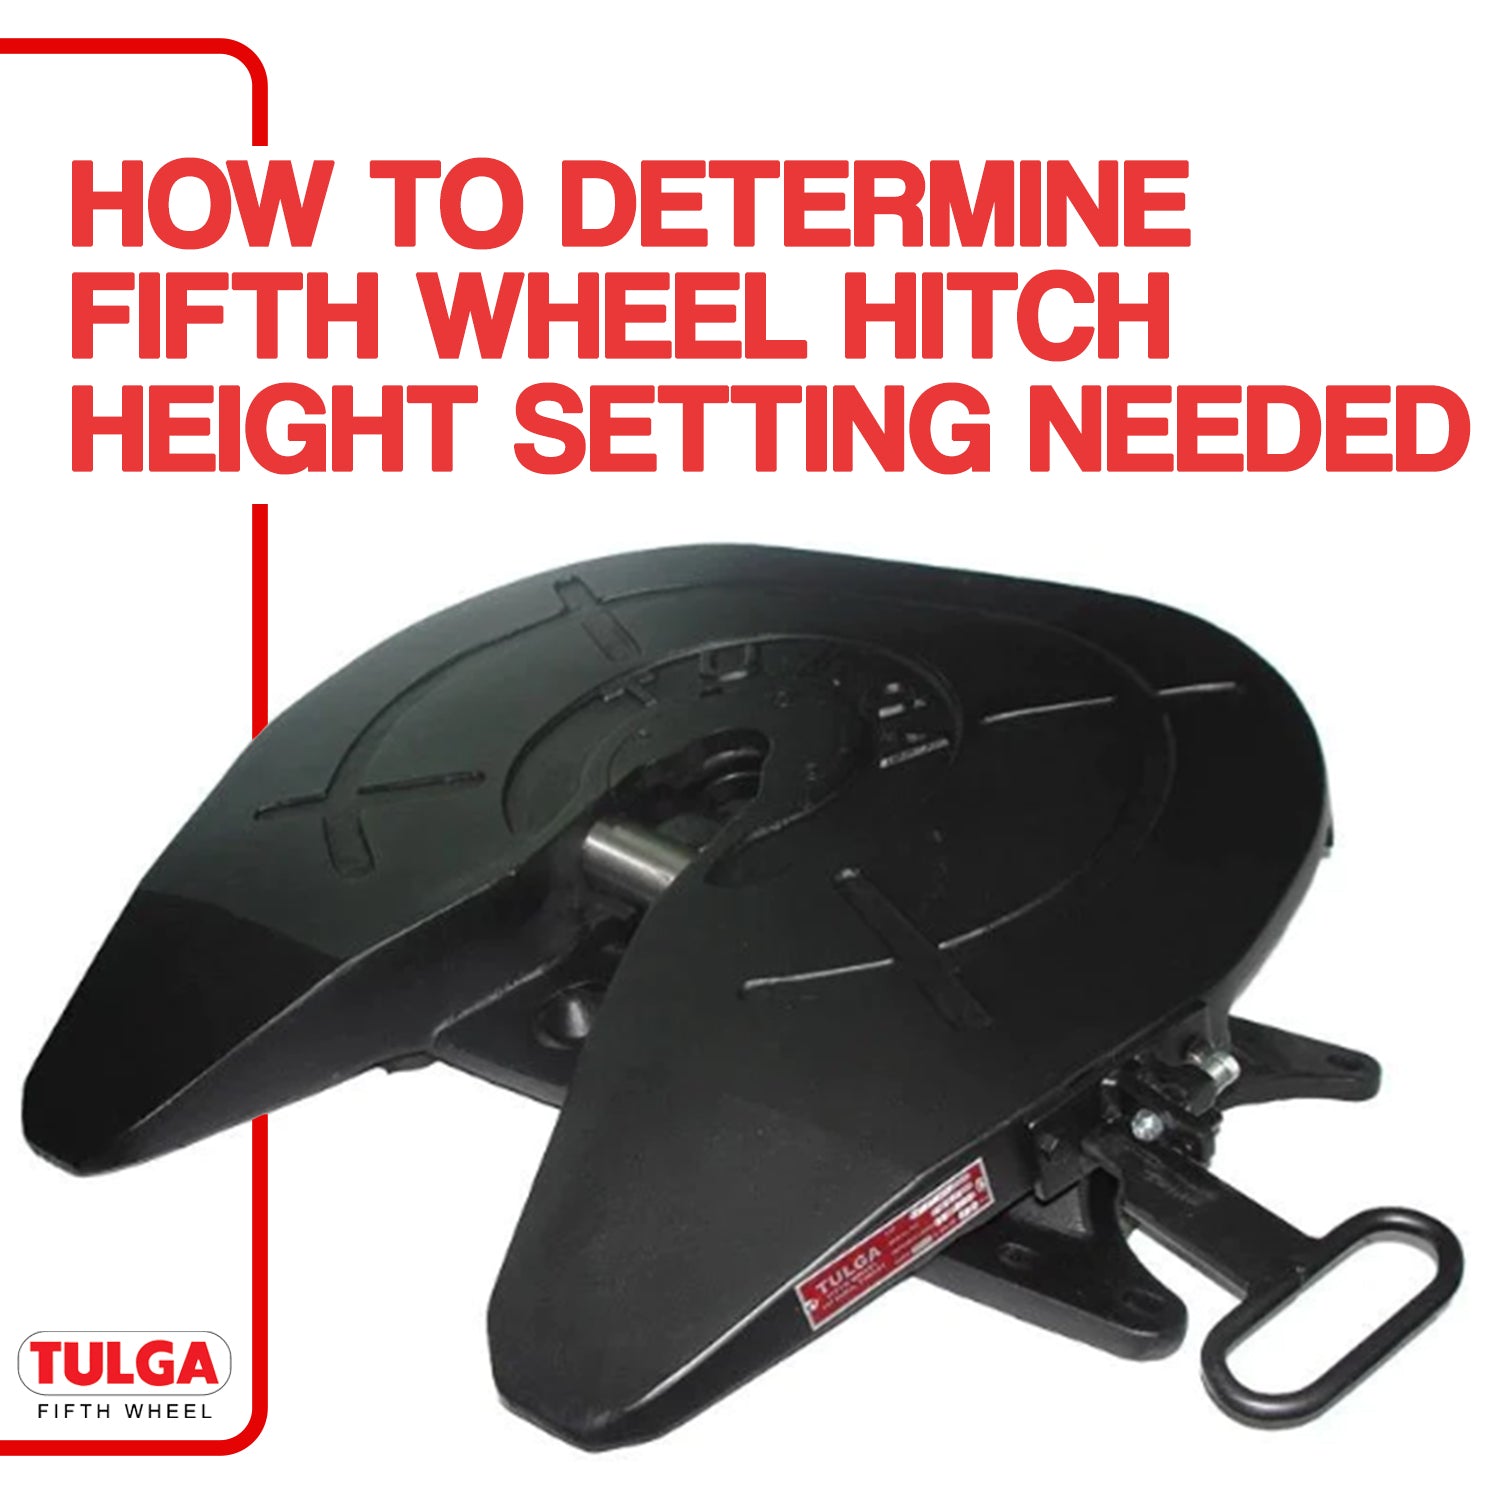 How to Determine Fifth Wheel Hitch Height Setting Needed